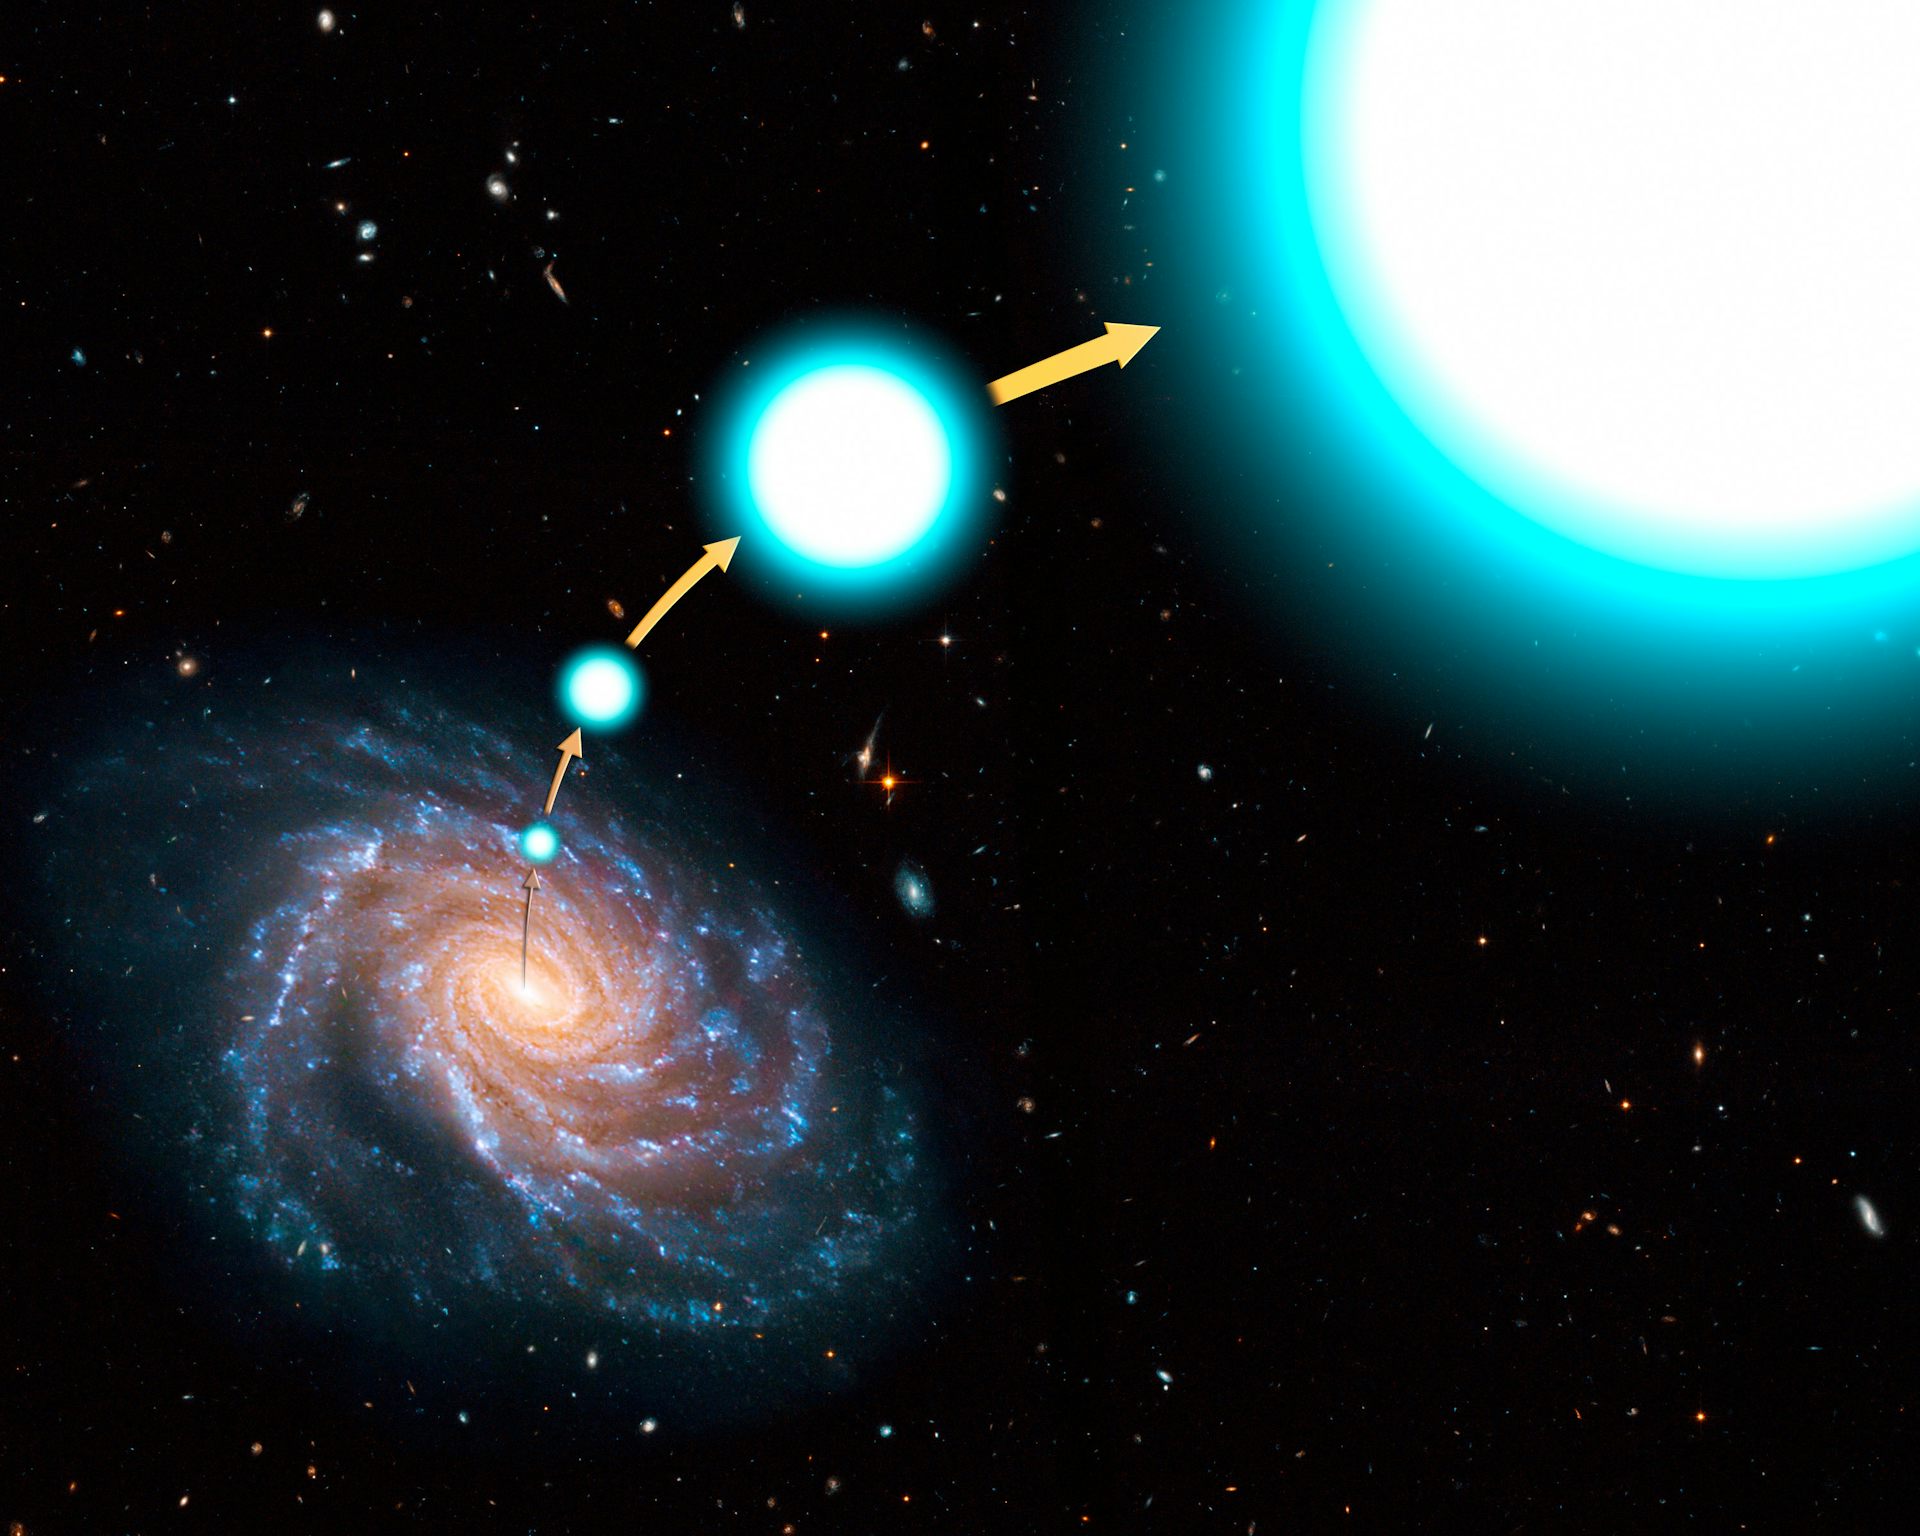 A bluish white hypervoilcu star being shot out of the Milky Way galaxy